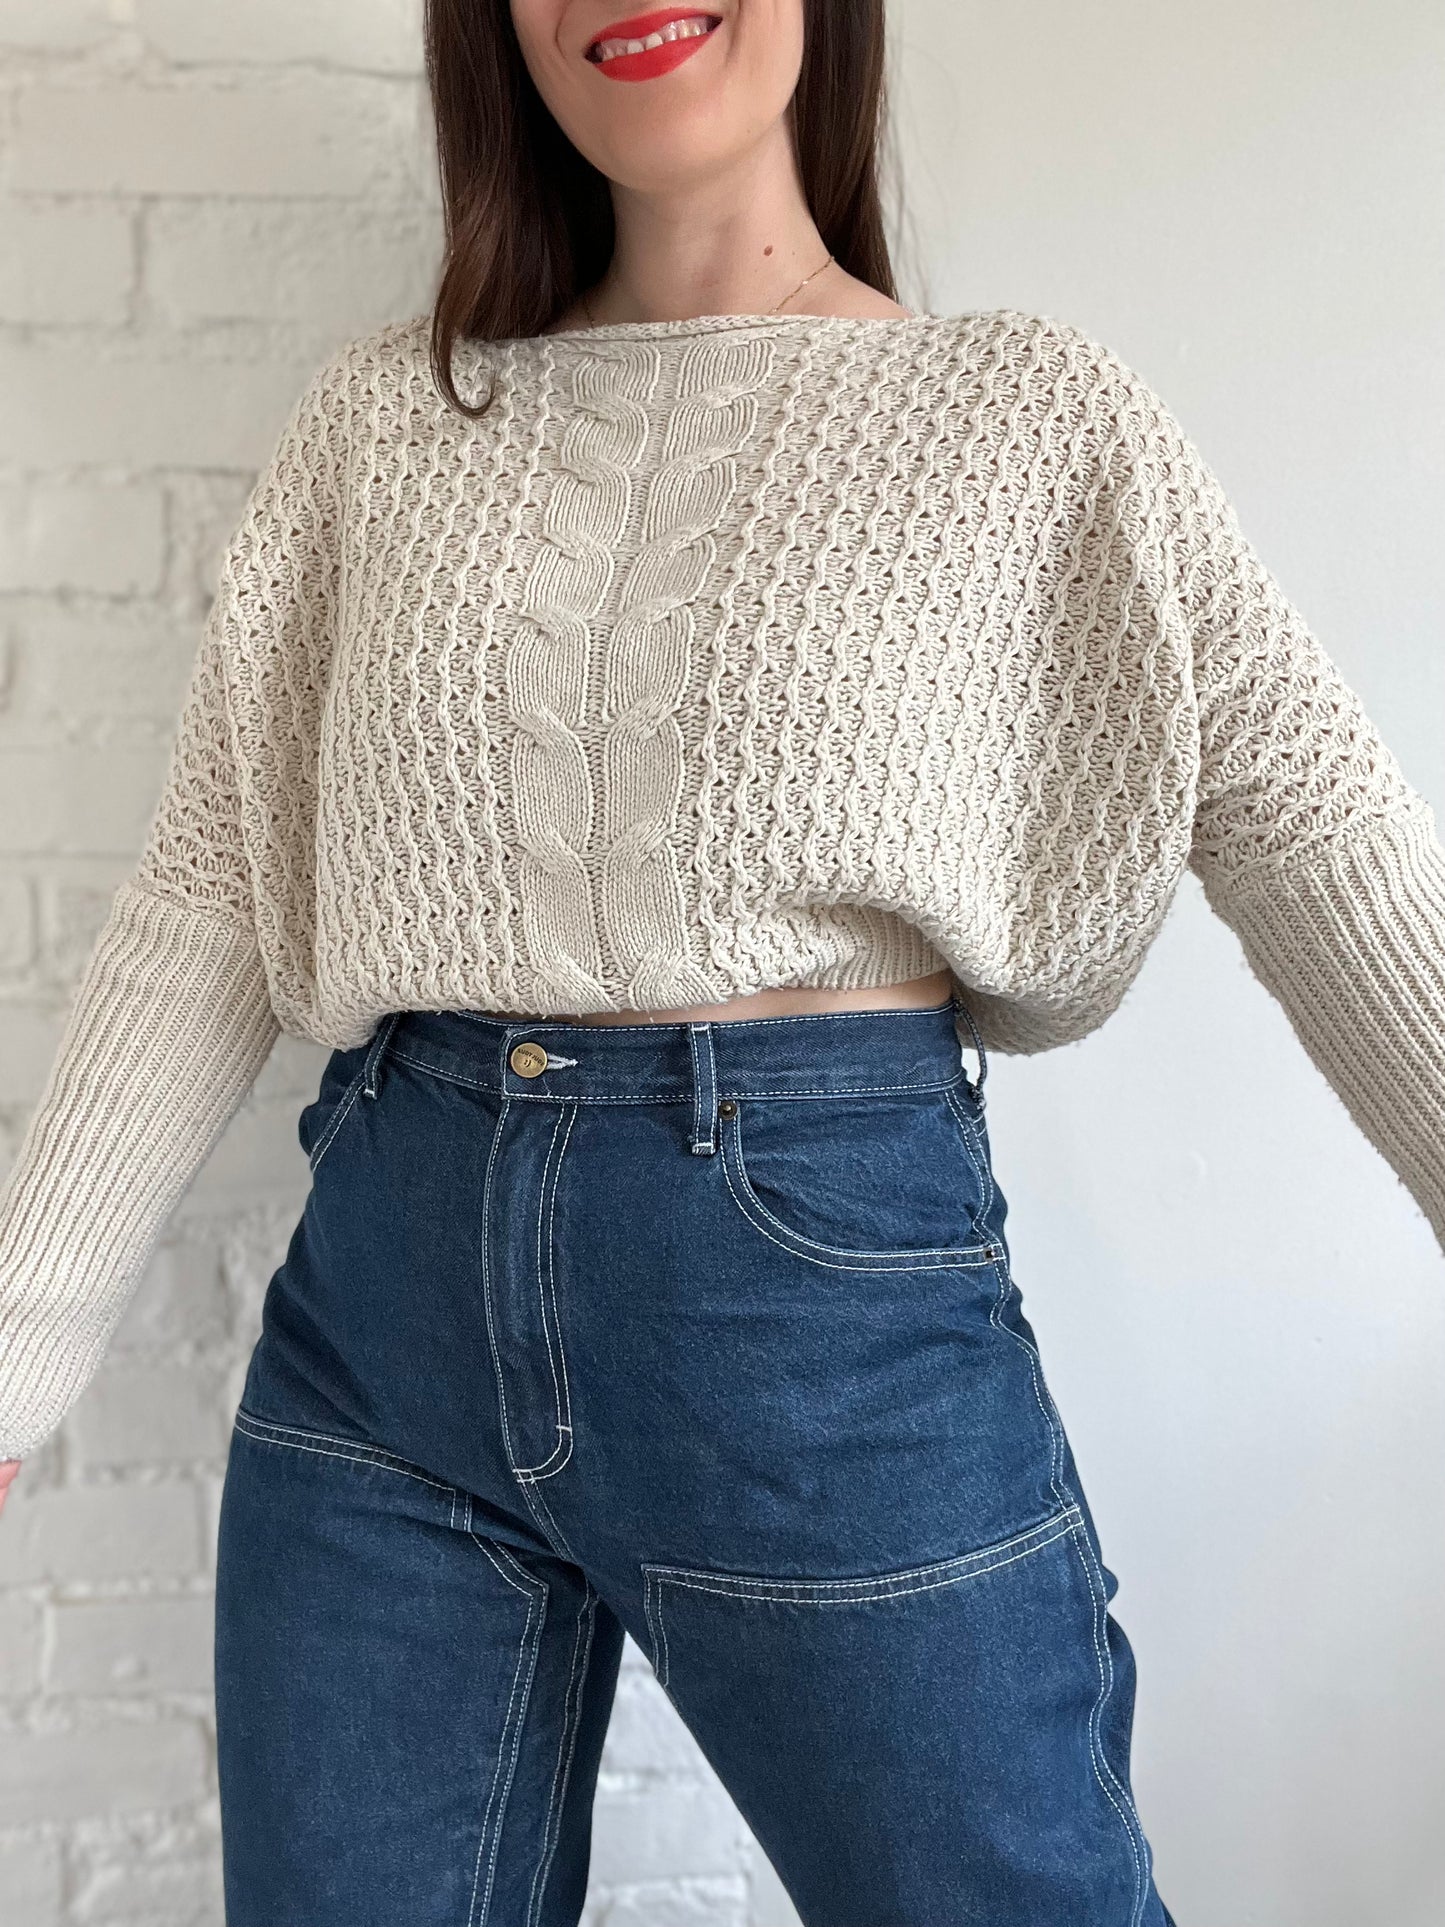 Cropped Lightweight Knit Sweater - S